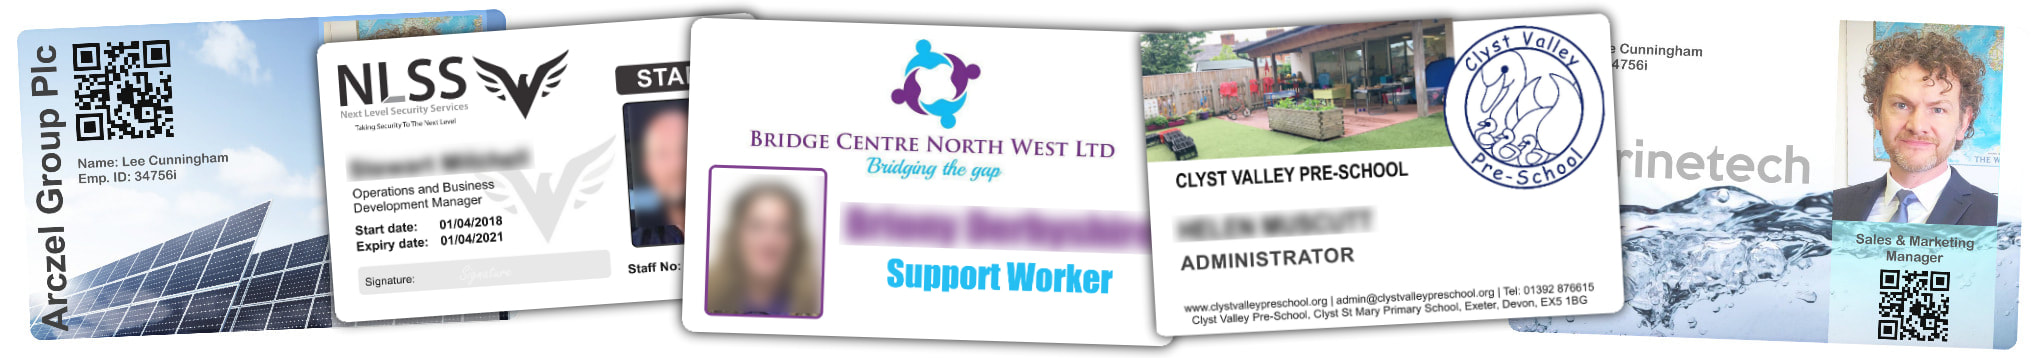 Stockton-on-Tees​ examples of staff photo ID cards | samples of employee Identity card printing | Workers ID cards printed in 